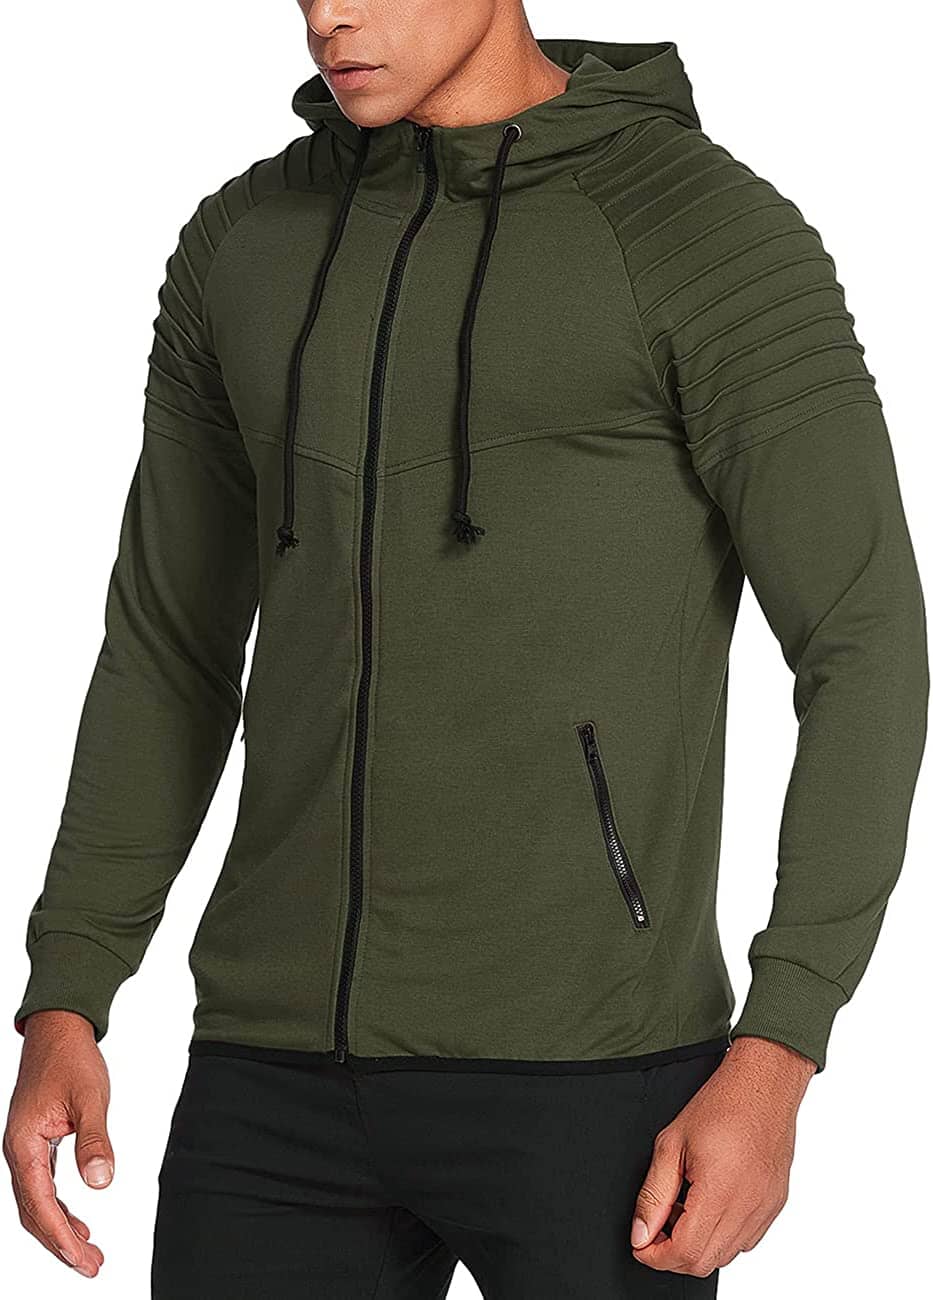 Fashion Long Sleeve Hooded With Zipper Pocket (US Only) Hoodies Coofandy's Army Green S 